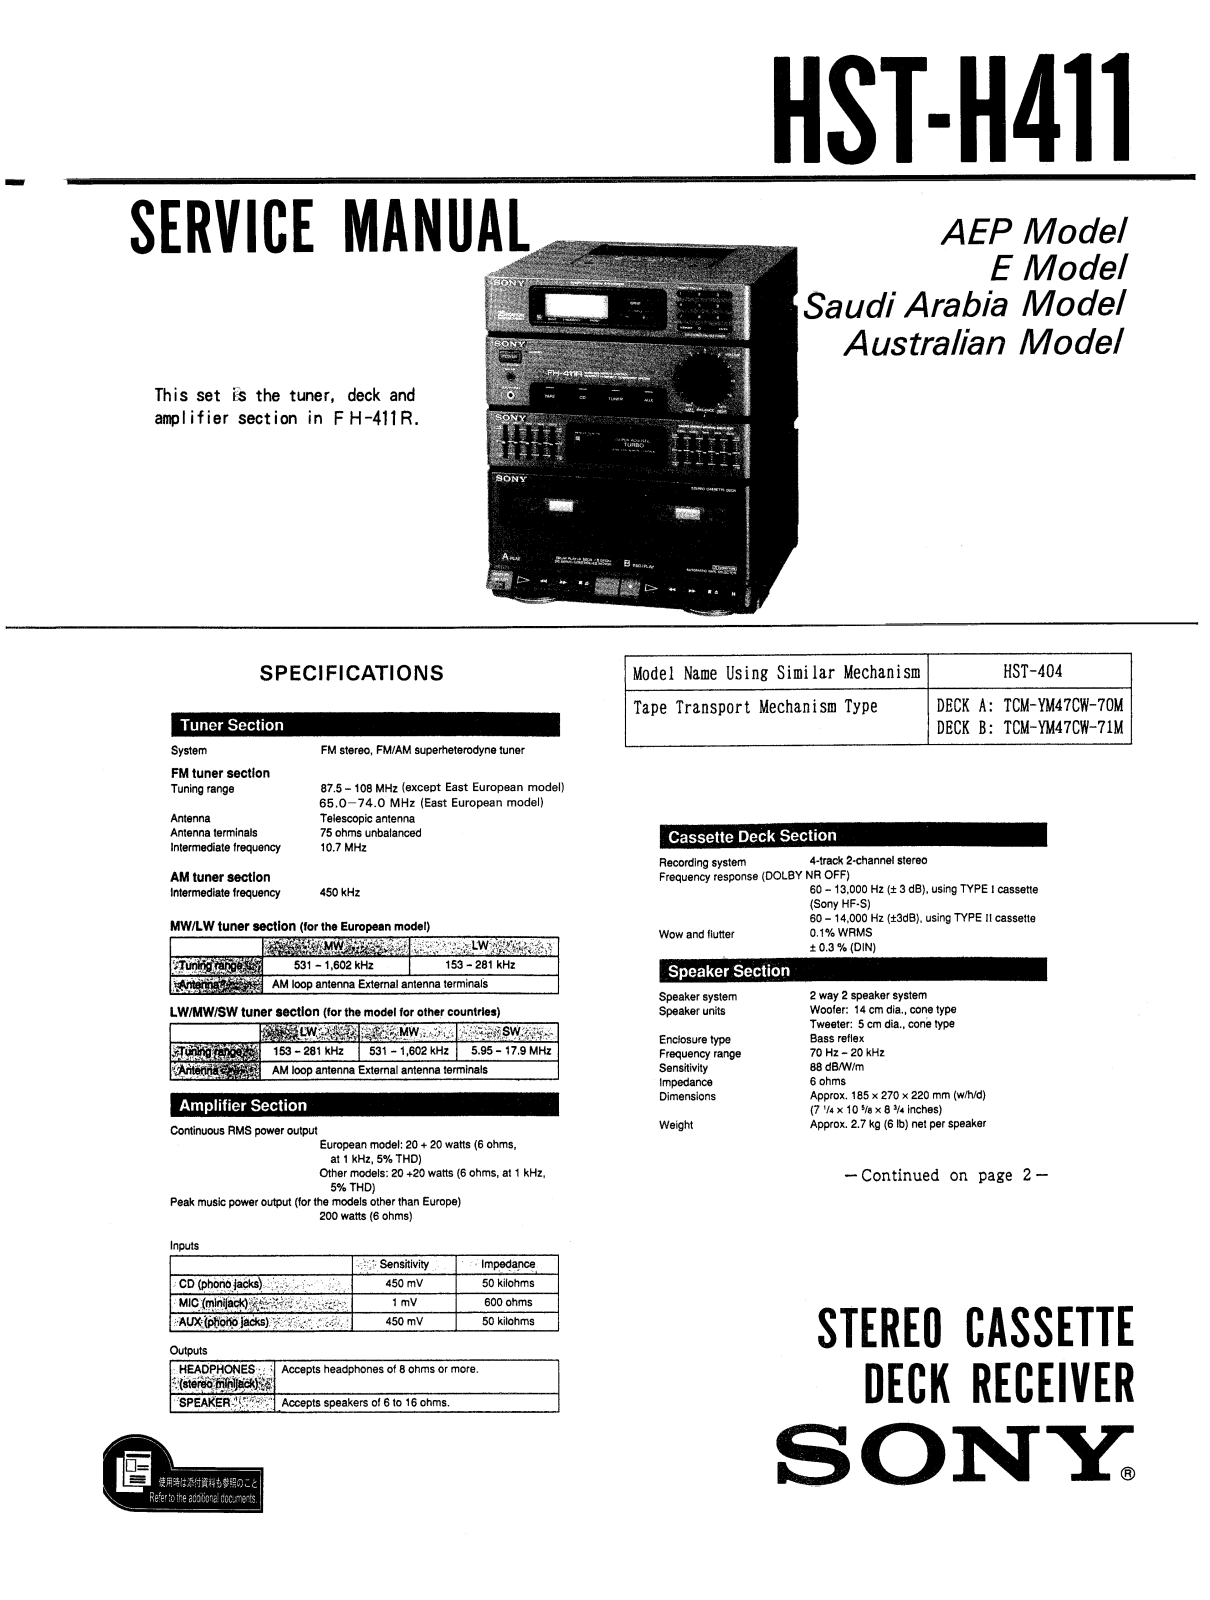 Sony HSTH-411 Service manual